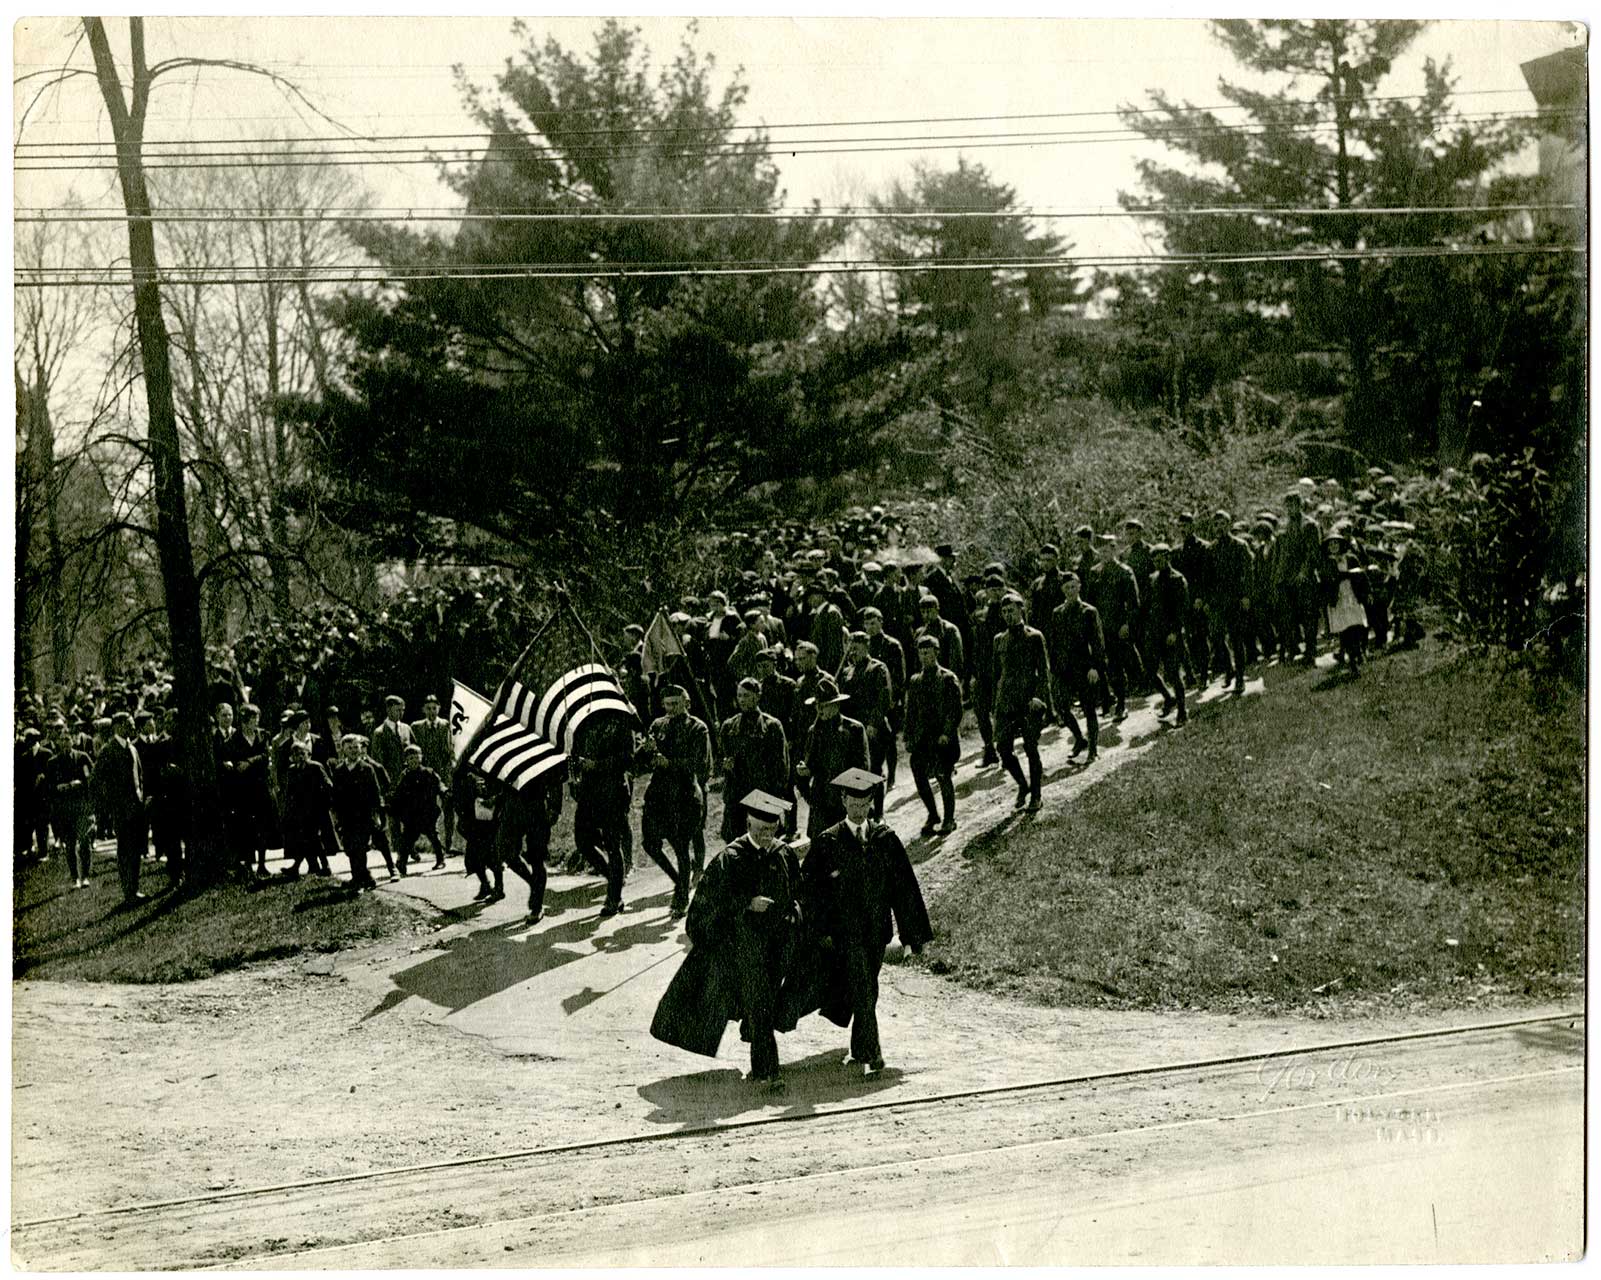 Amherst “Black Cats” Ambulance Unit and Amherst students, following President Meiklejohn and Dean Olds to College Hall, April 19